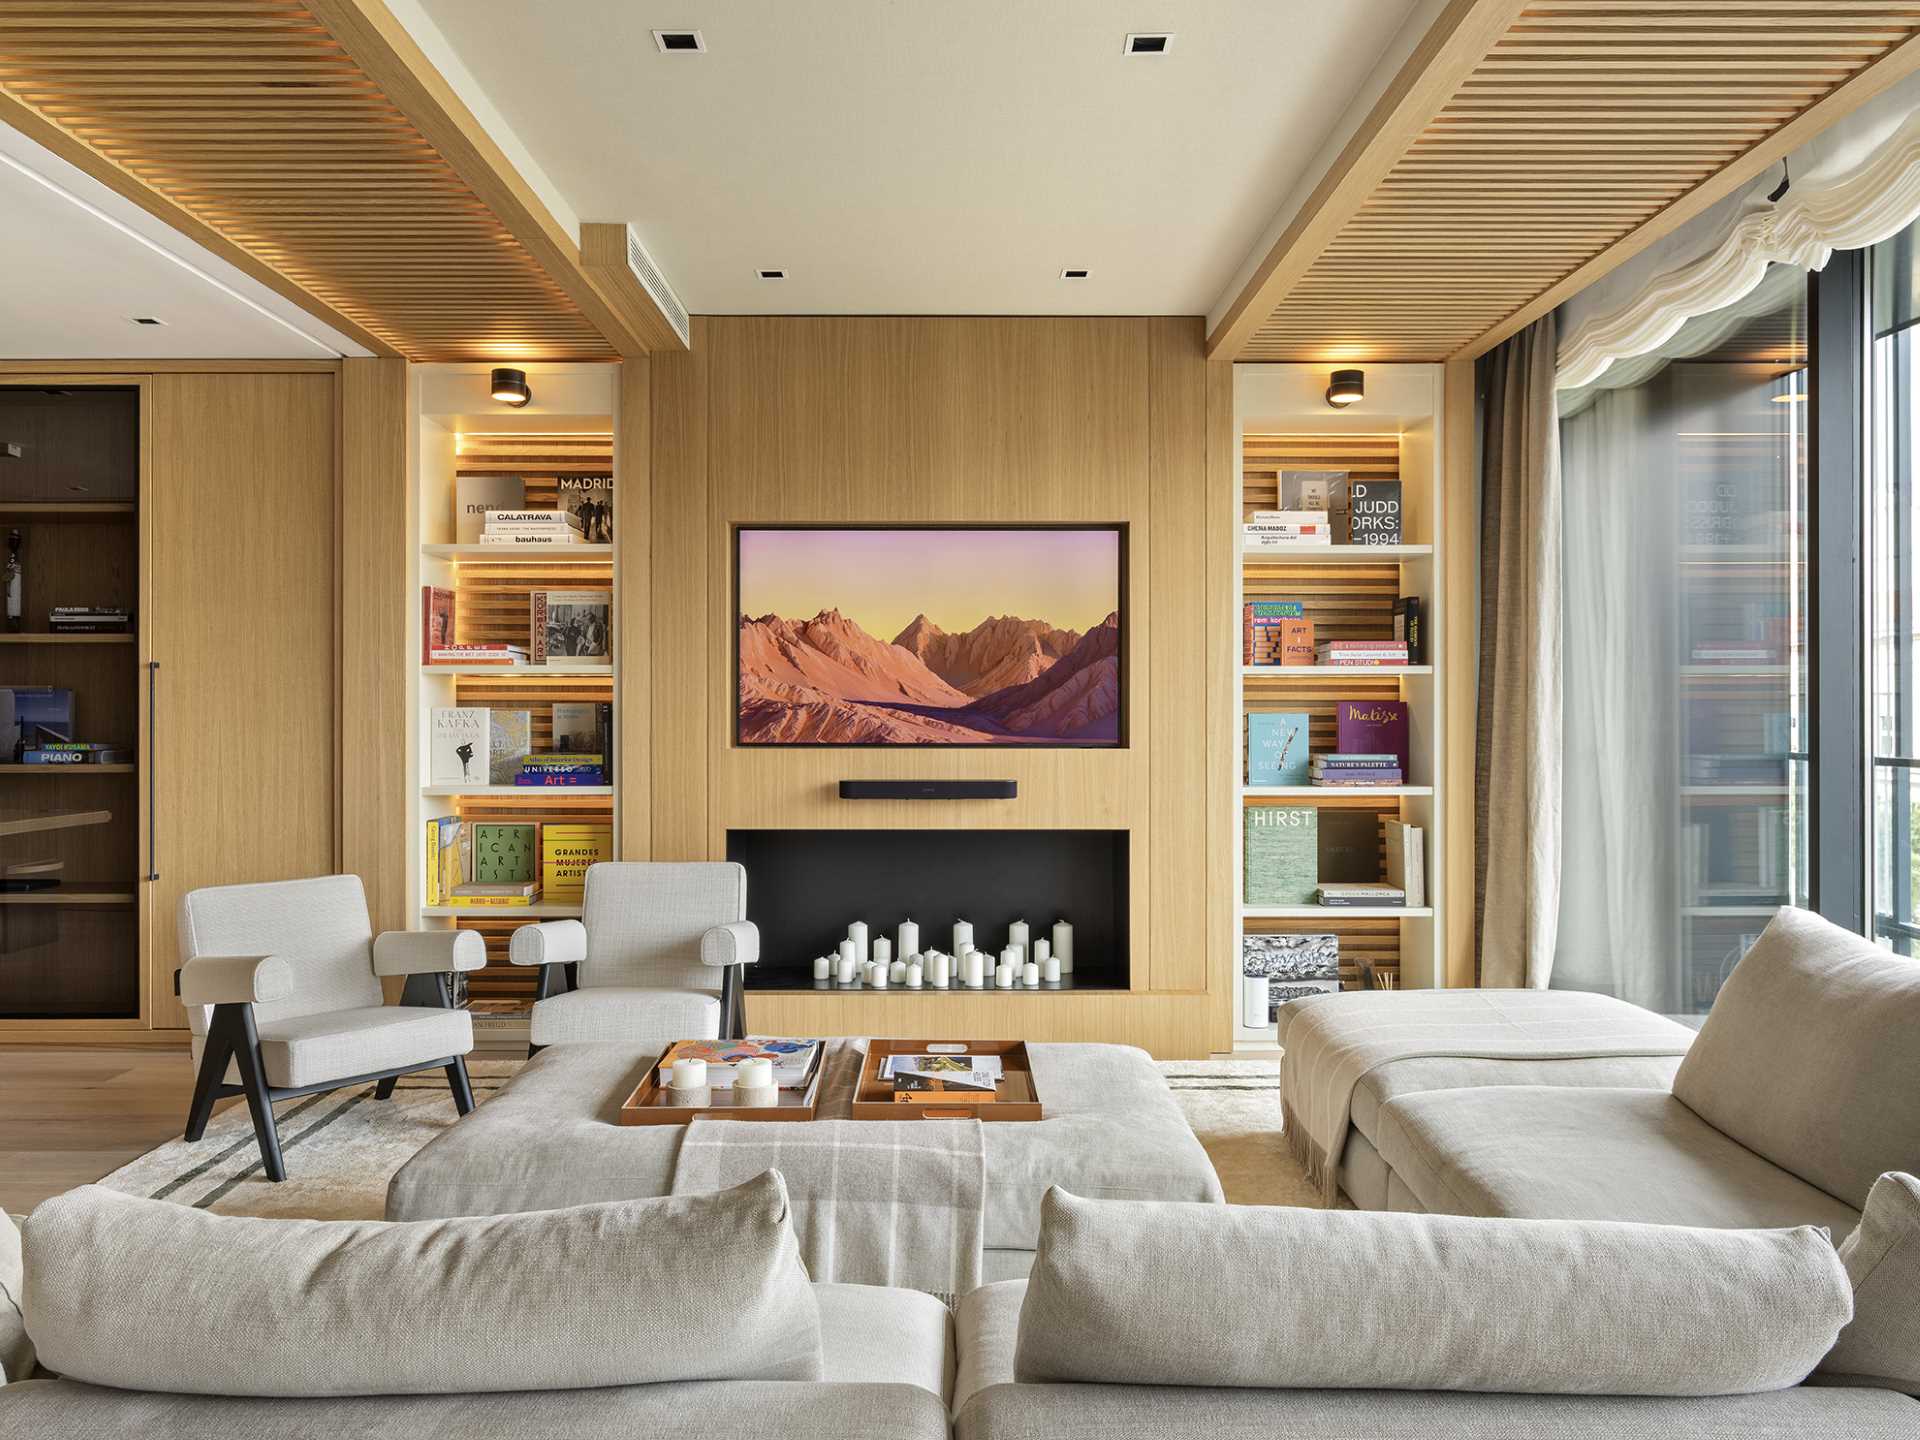 In the living room, a wall-mounted TV is disguised as art, while illuminated wooden shelves on either side stand as curated showcases, highlighting the owner's colorful book collection.